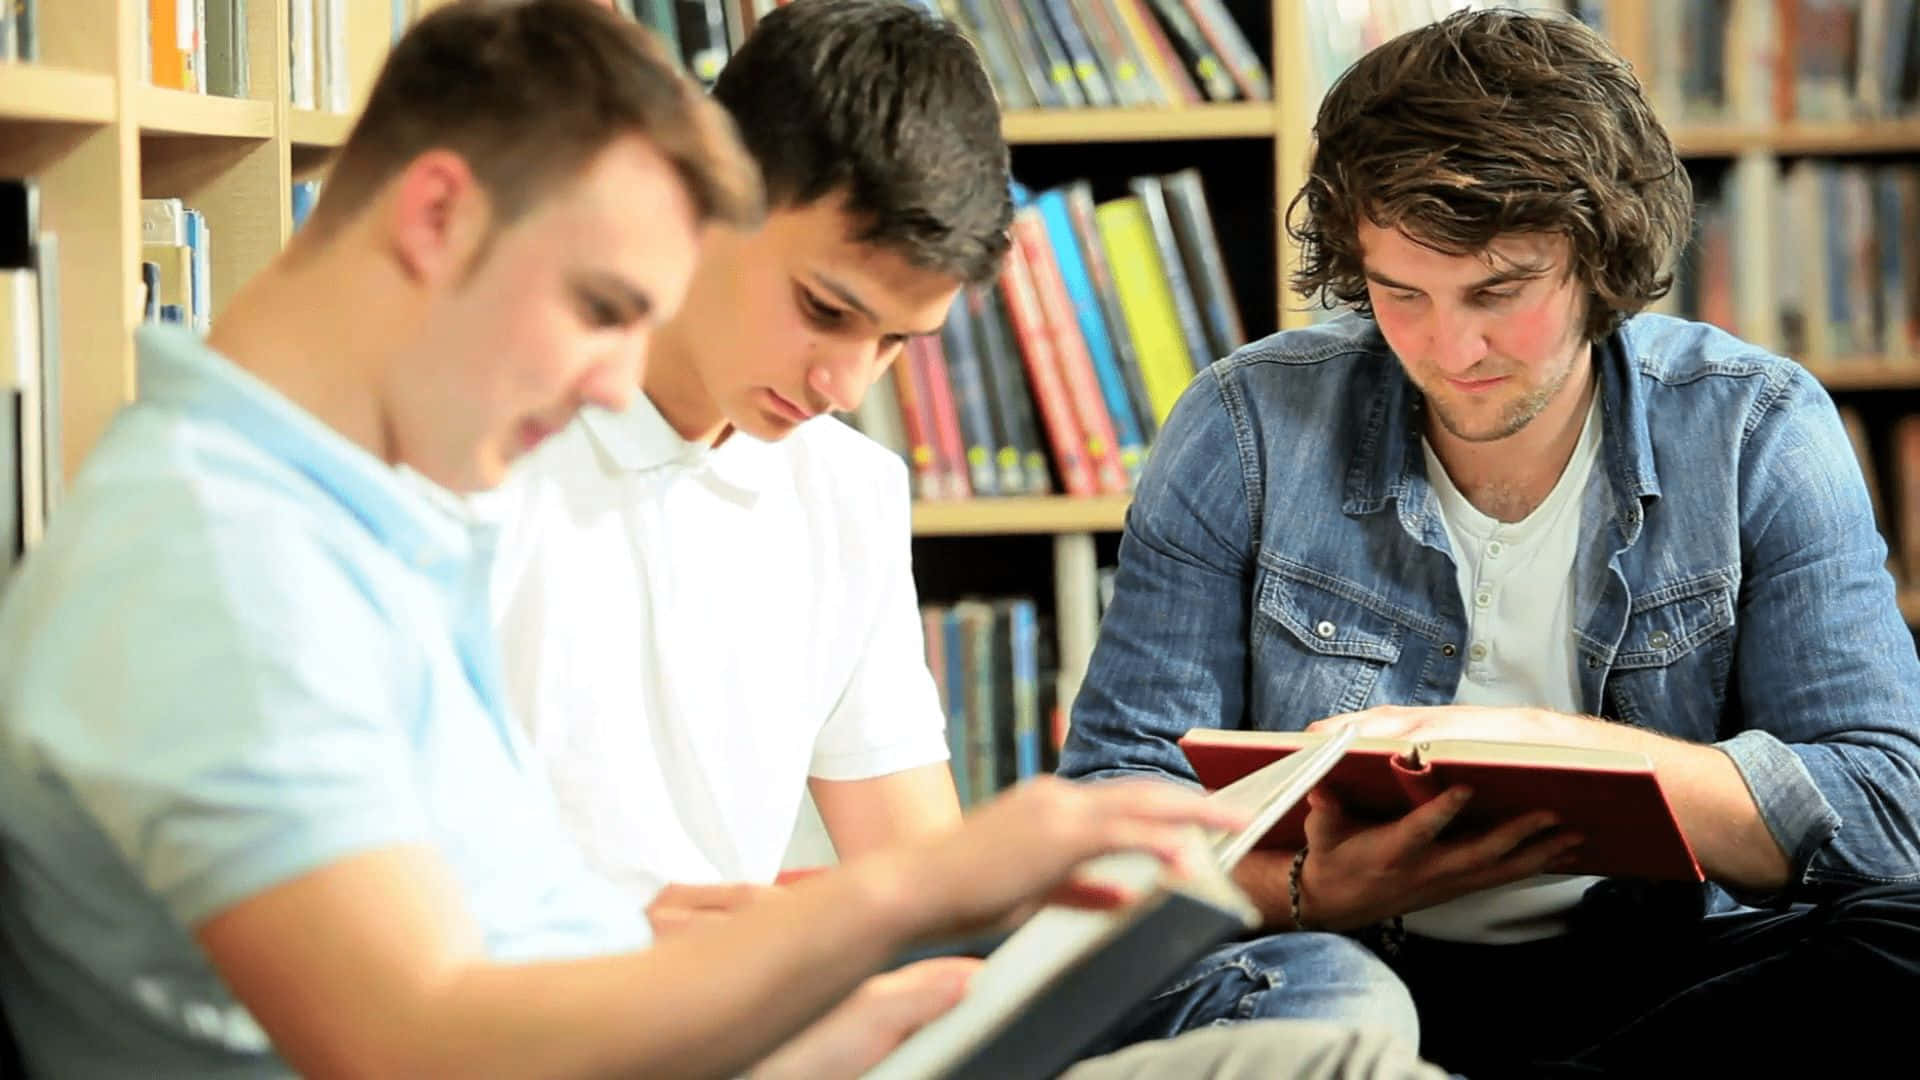 Students Studying Together Library.jpg